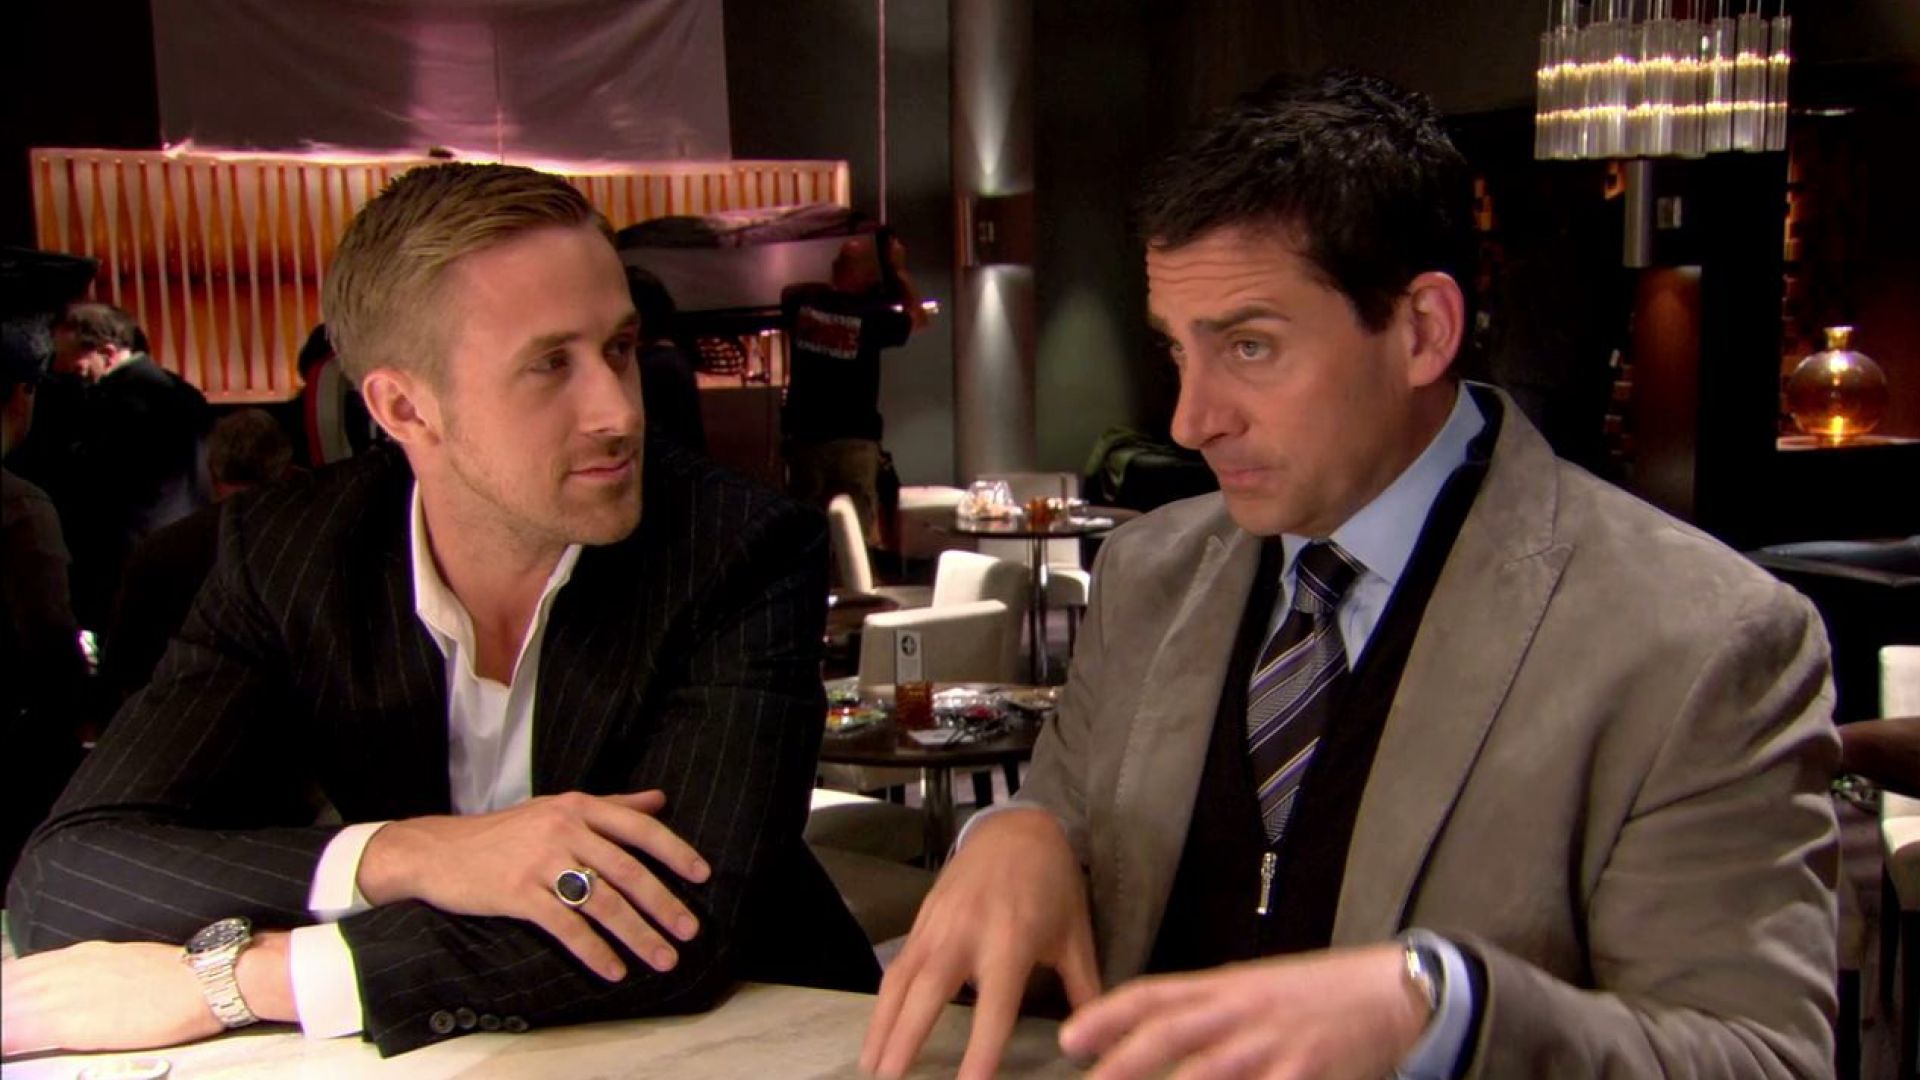 Behind the Scenes of Crazy Stupid Love with Steve Carell and Ryan